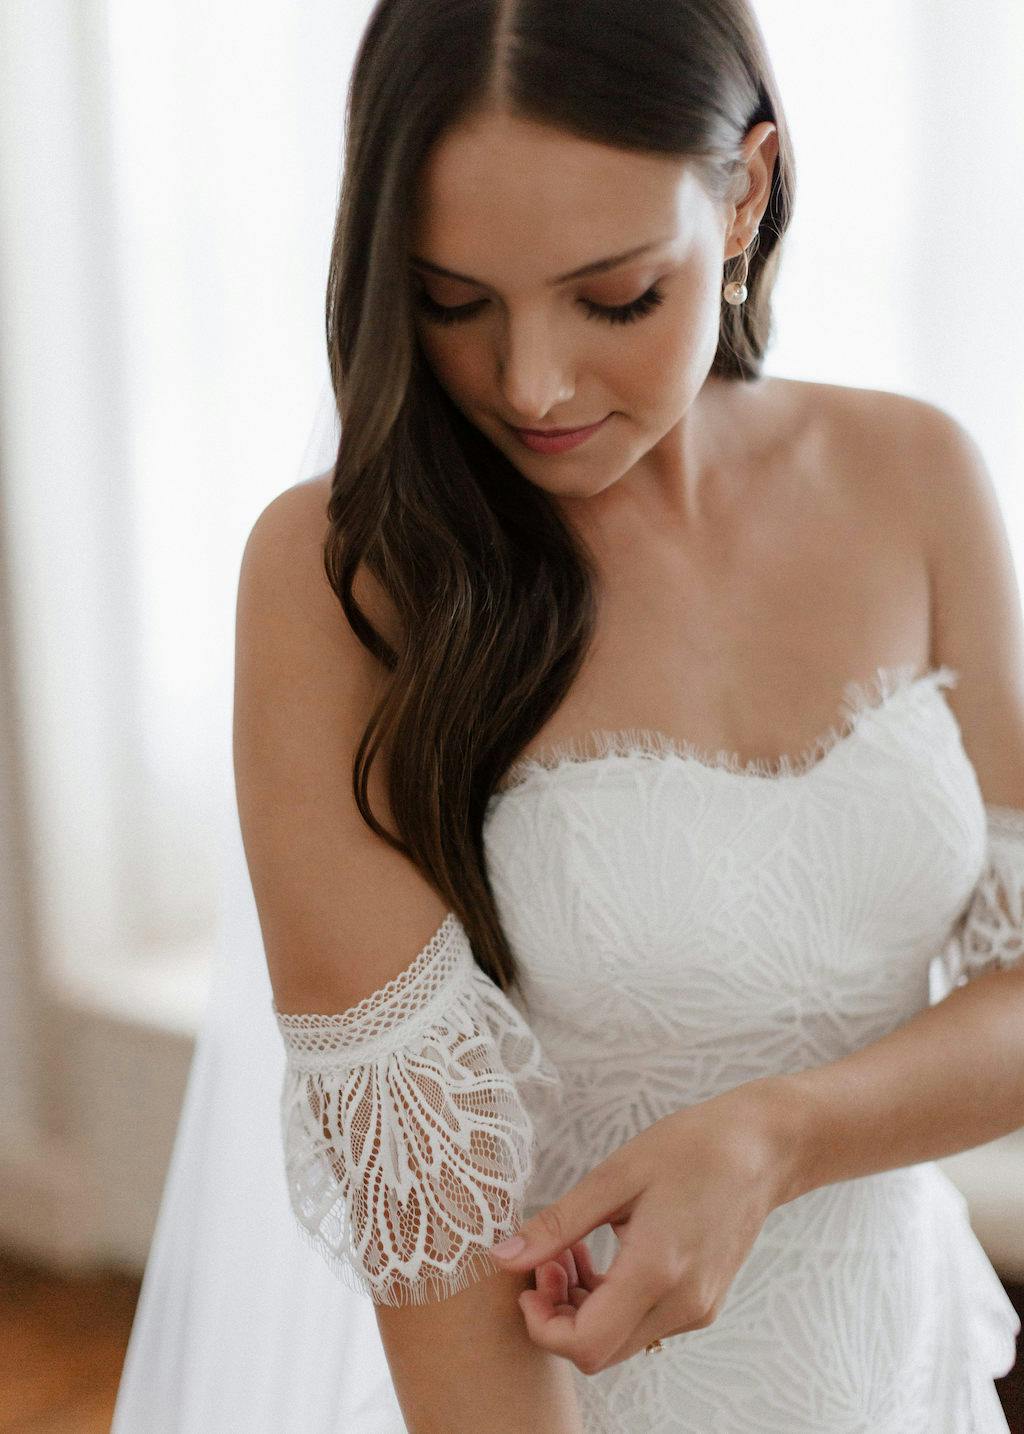 A bride with long brown hair adjusts the lace sleeve of her off-the-shoulder wedding dress. The dress features intricate lace detailing. She is looking down with a serene expression, standing indoors with a softly lit background.